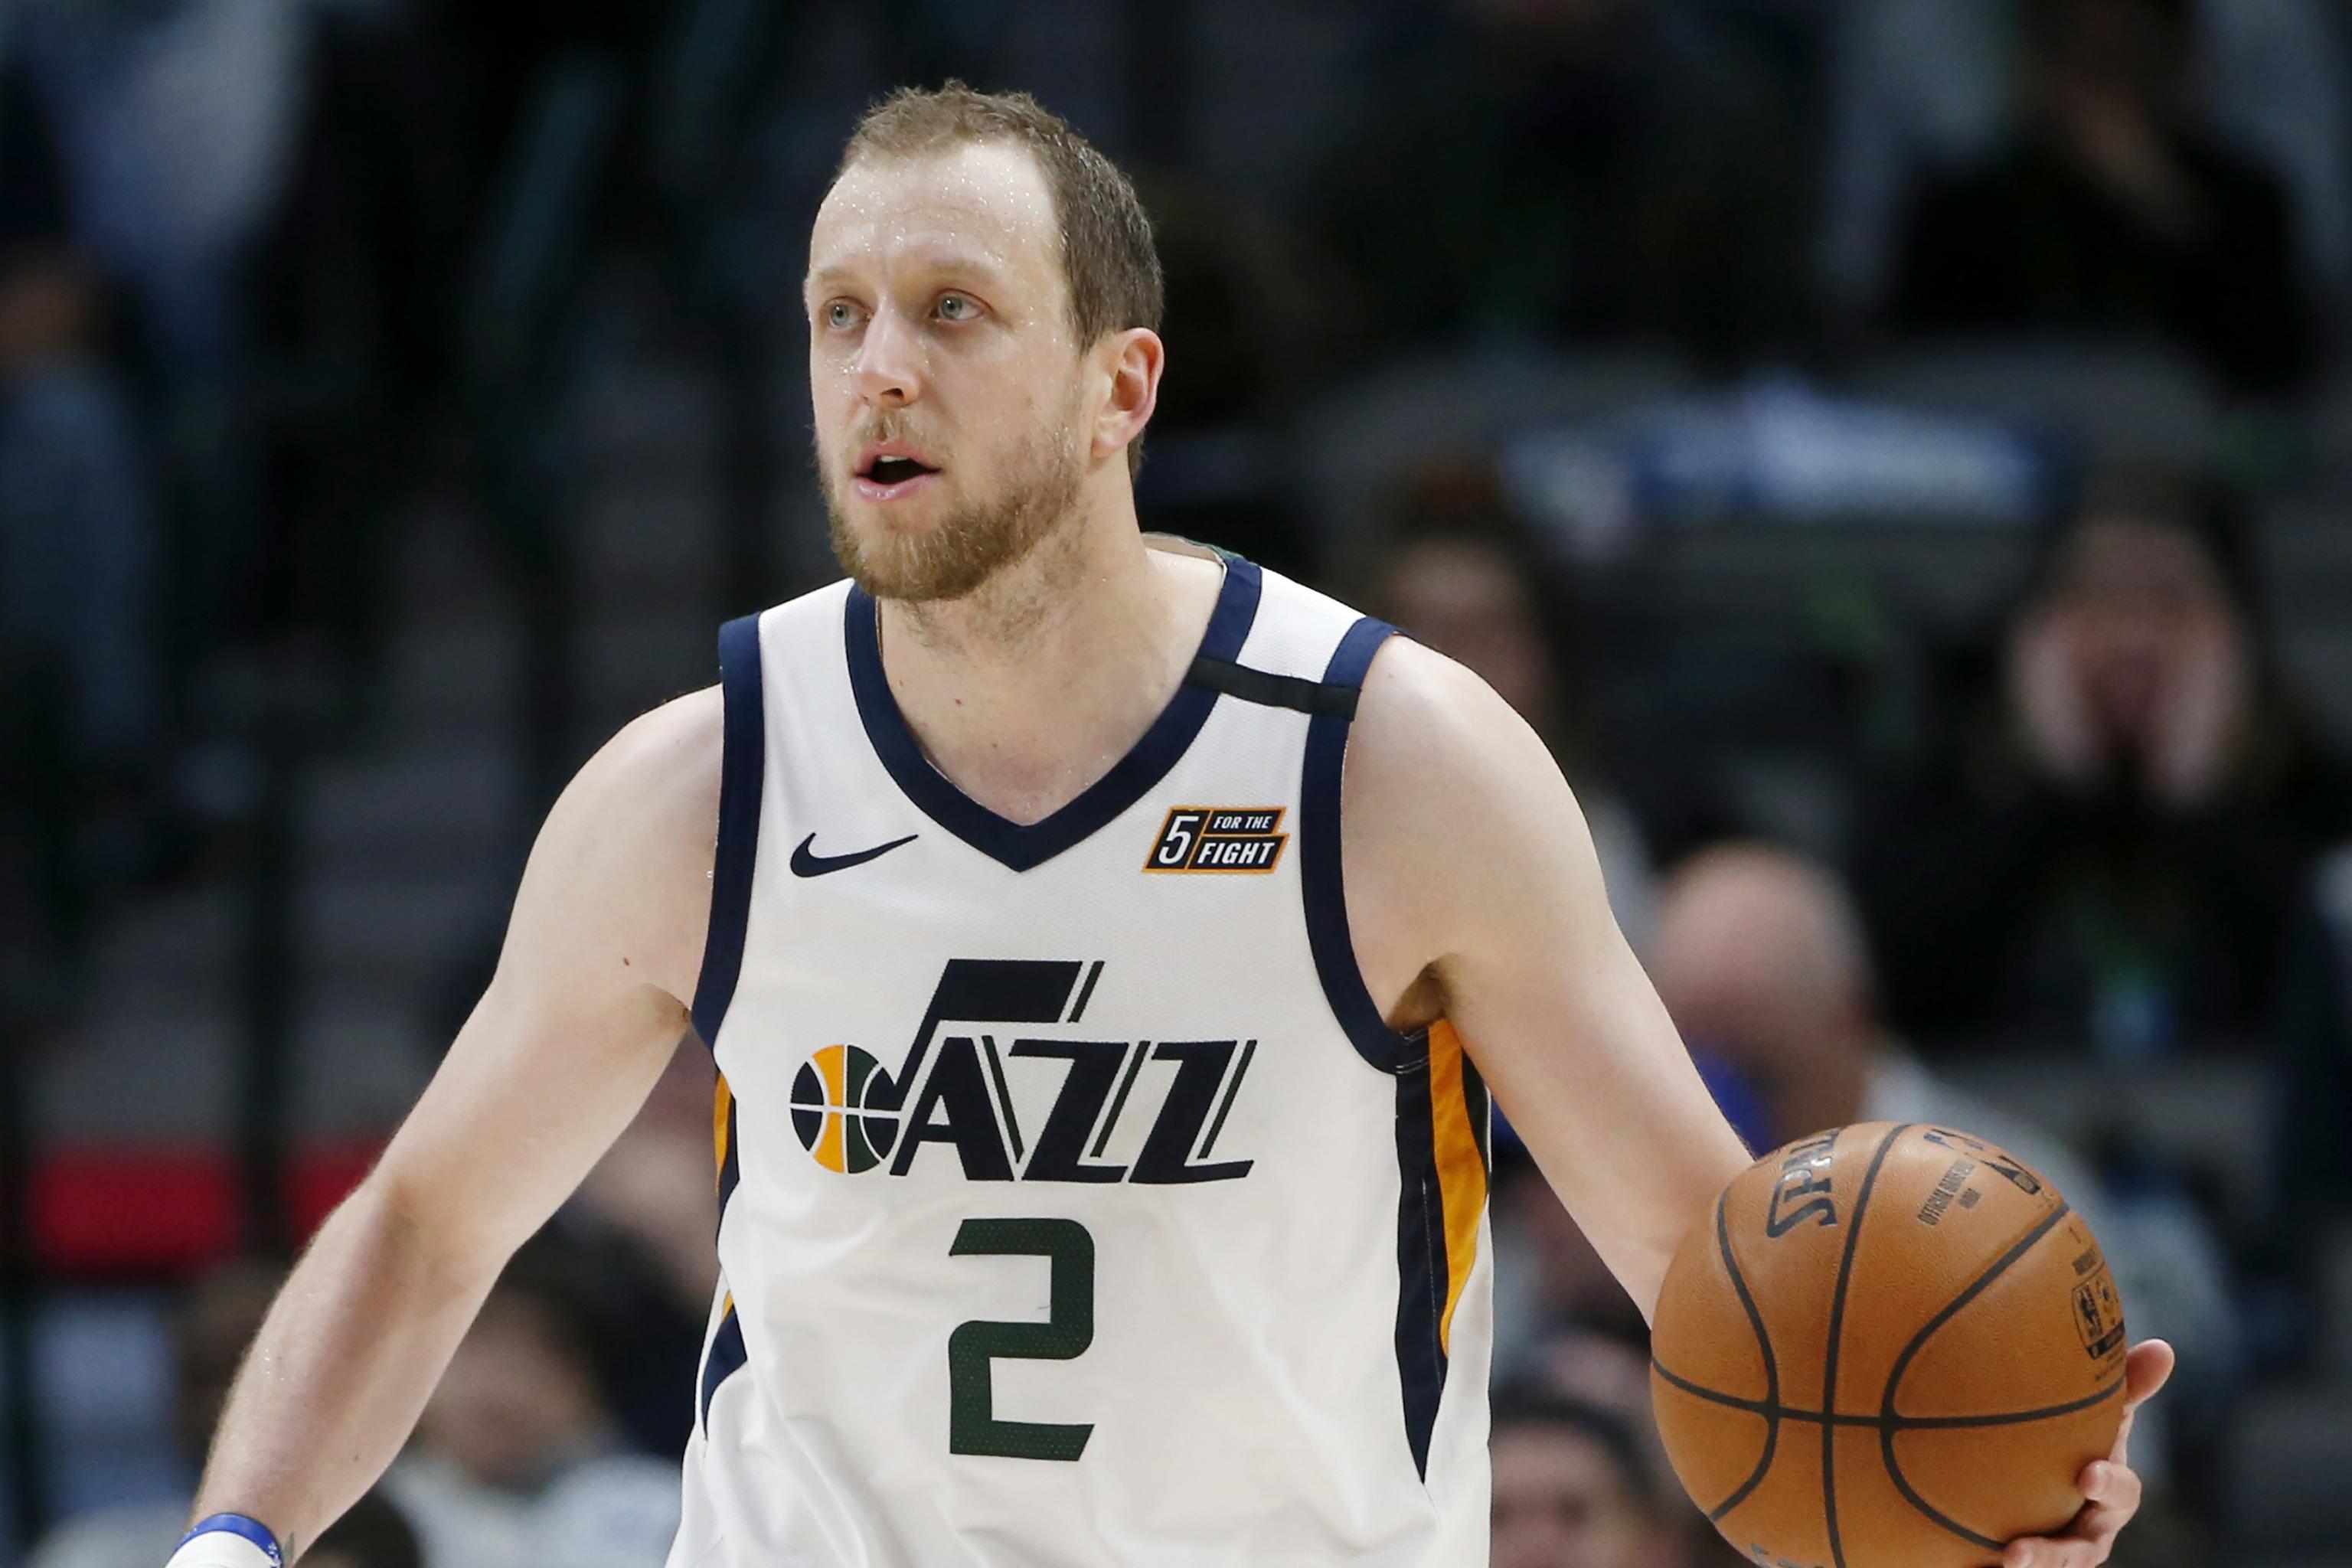 Utah Jazz Vs Los Angeles Clippers – NBA Game Day Preview: 02.19.2021